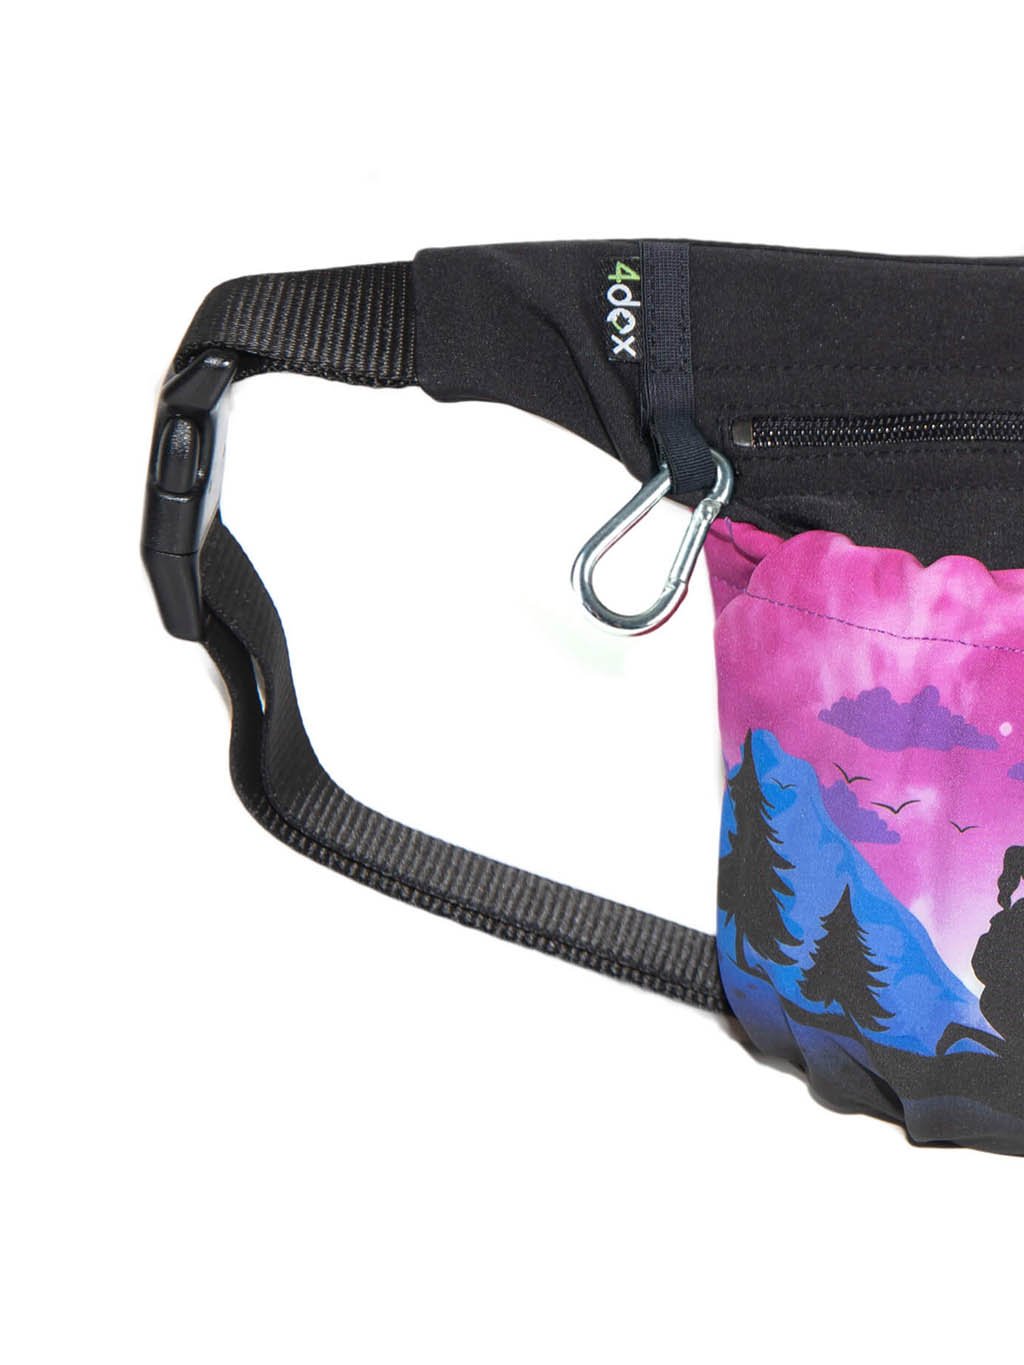 Dog training treat pouch 2 in 1 sunrise lilac No. 21